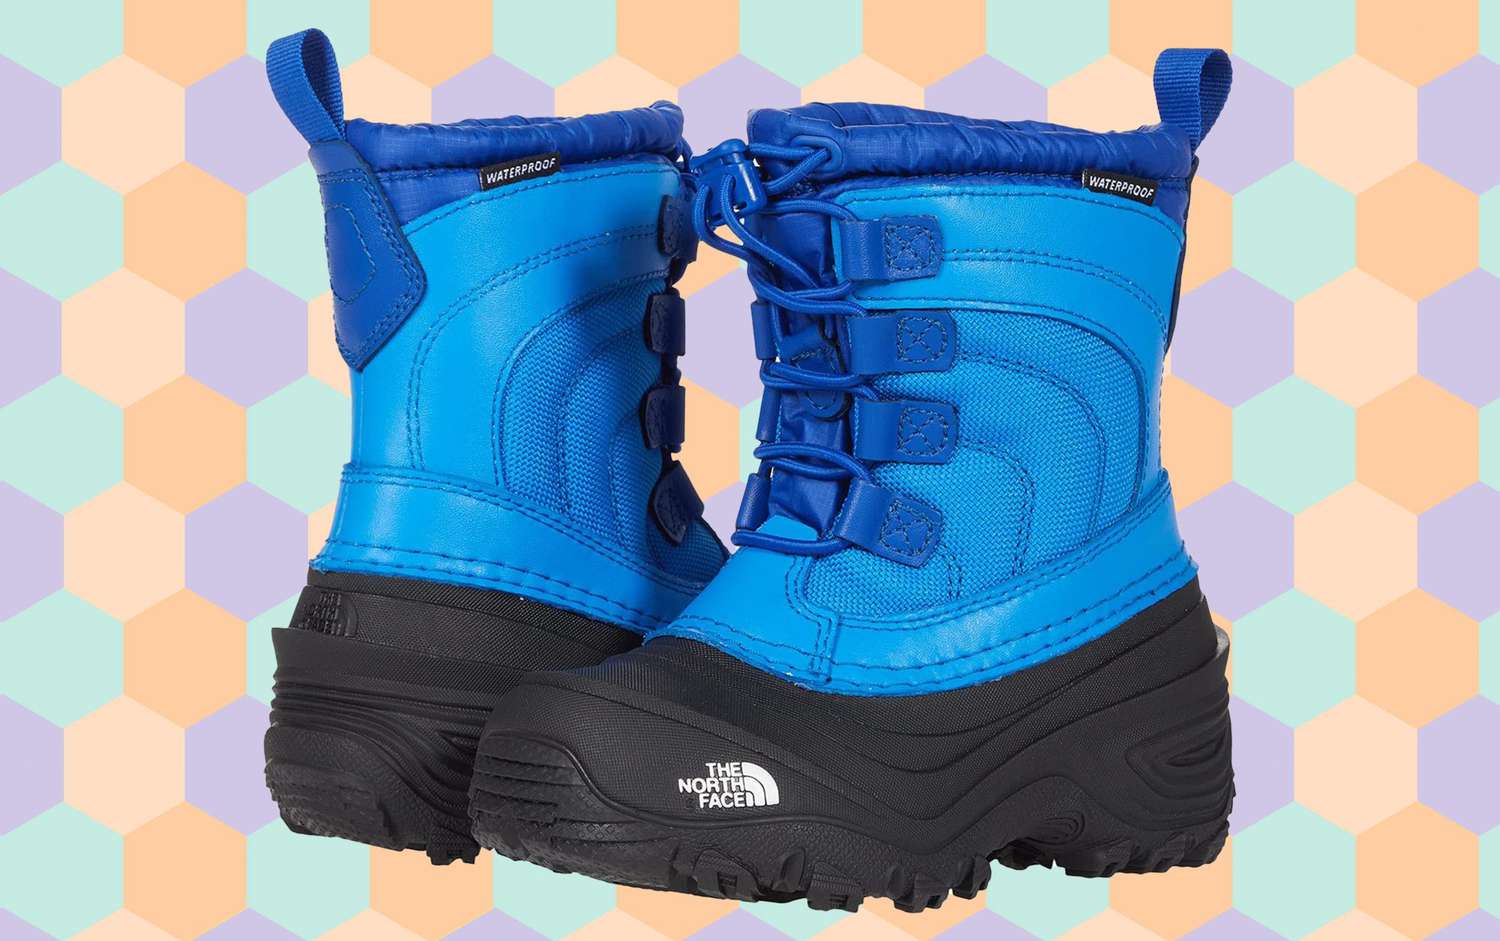 Kids Snow Boots Water Resistant Warm Inside Boys Girls Hiking Boots Cold Weather Non Slip Winter Boot Toddler/Little Kid/Big Kid